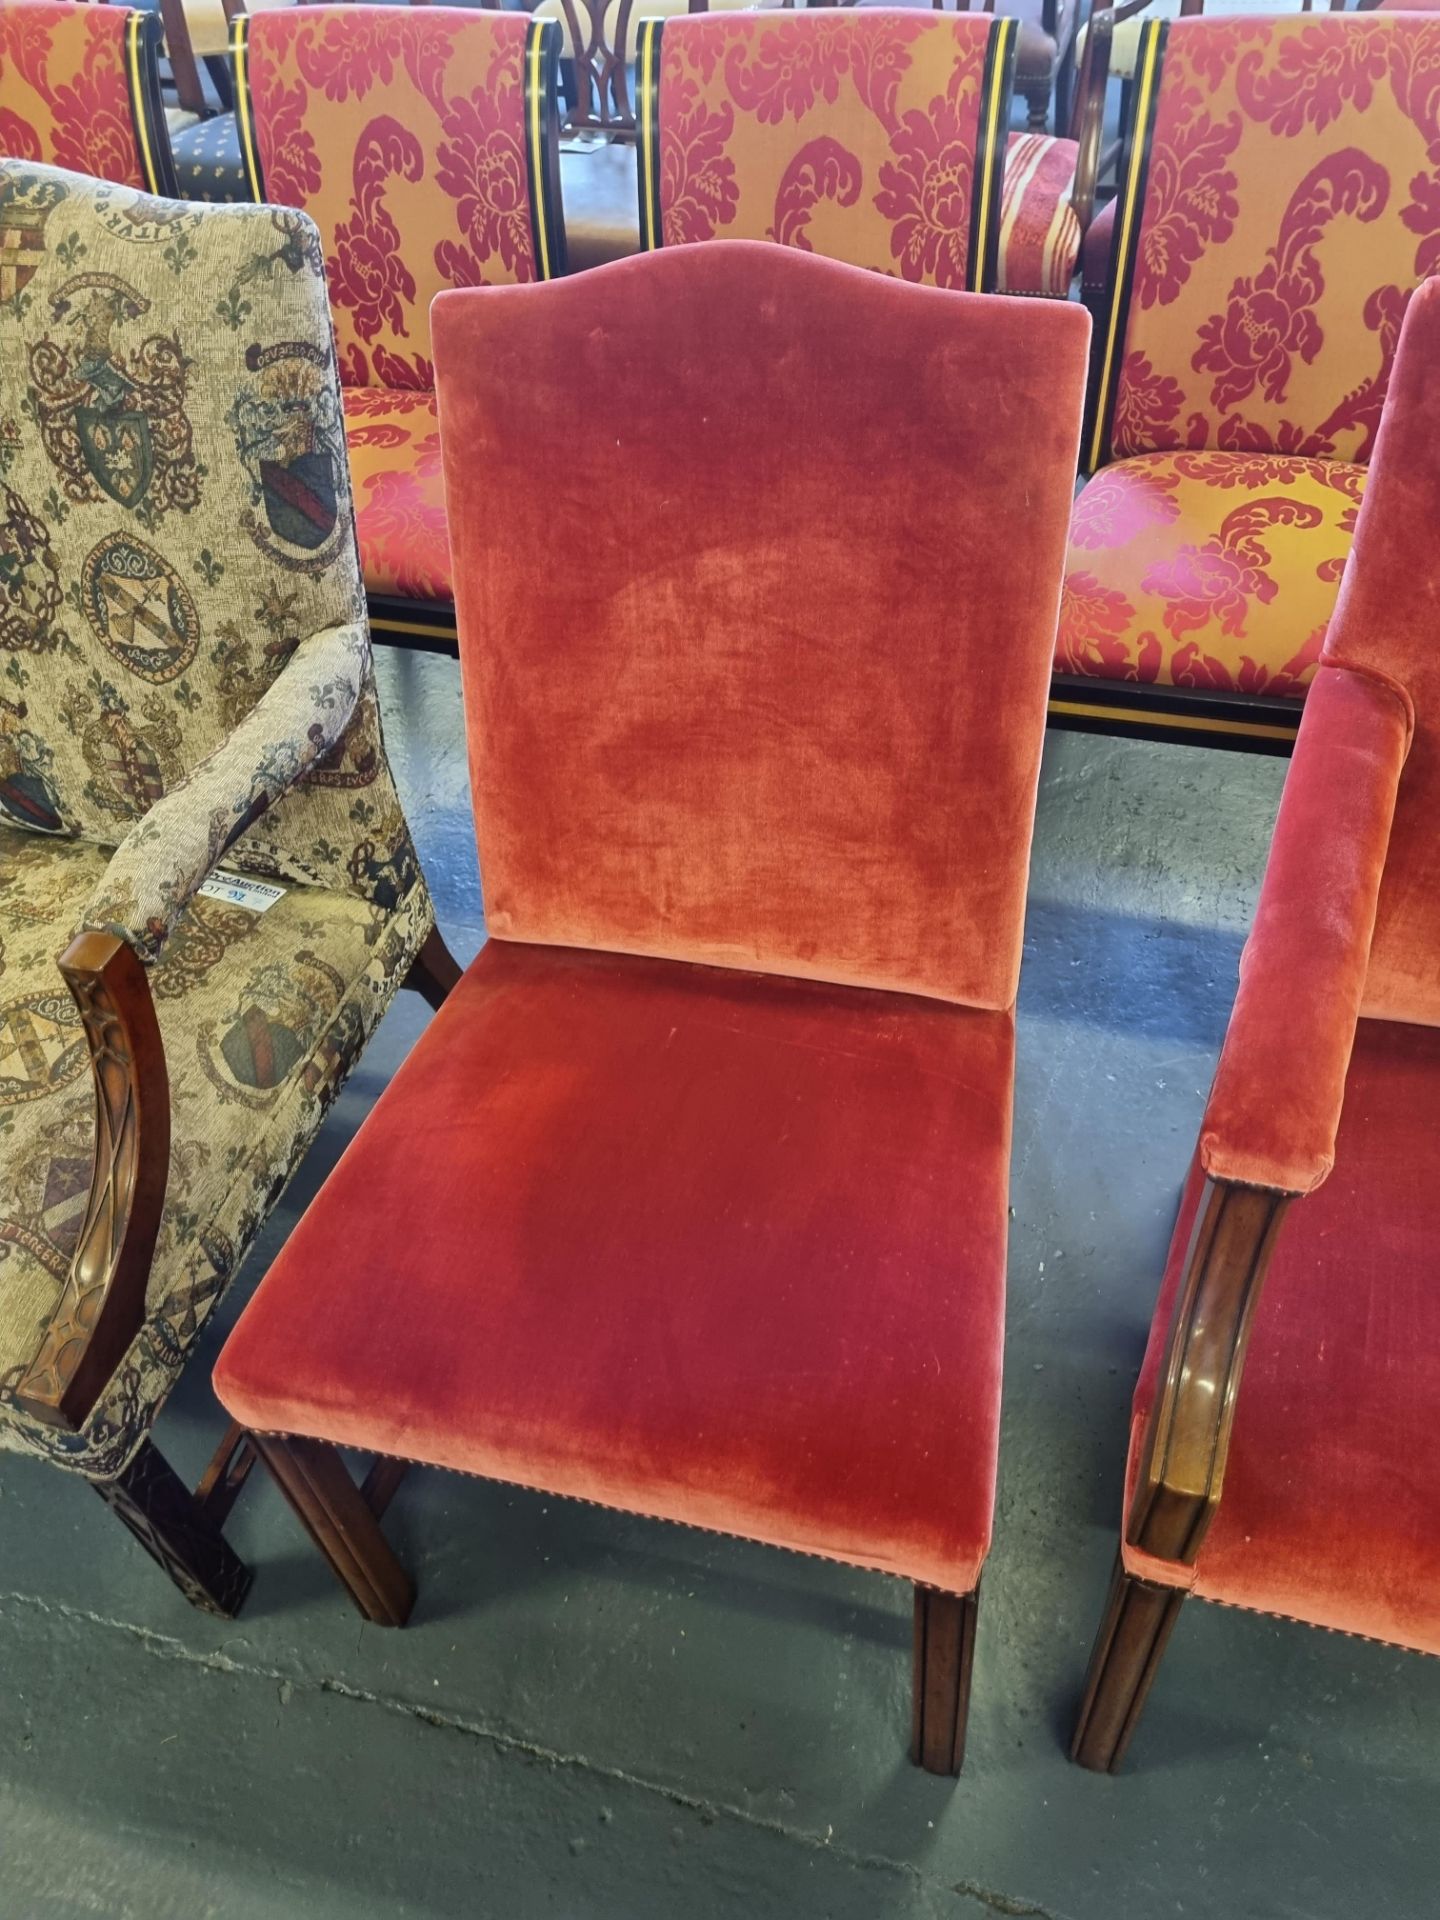 2 X Arthur Brett Mahogany Studded Upholstered Chairs Comprising Of 1 X Arm With Upholstered Back,